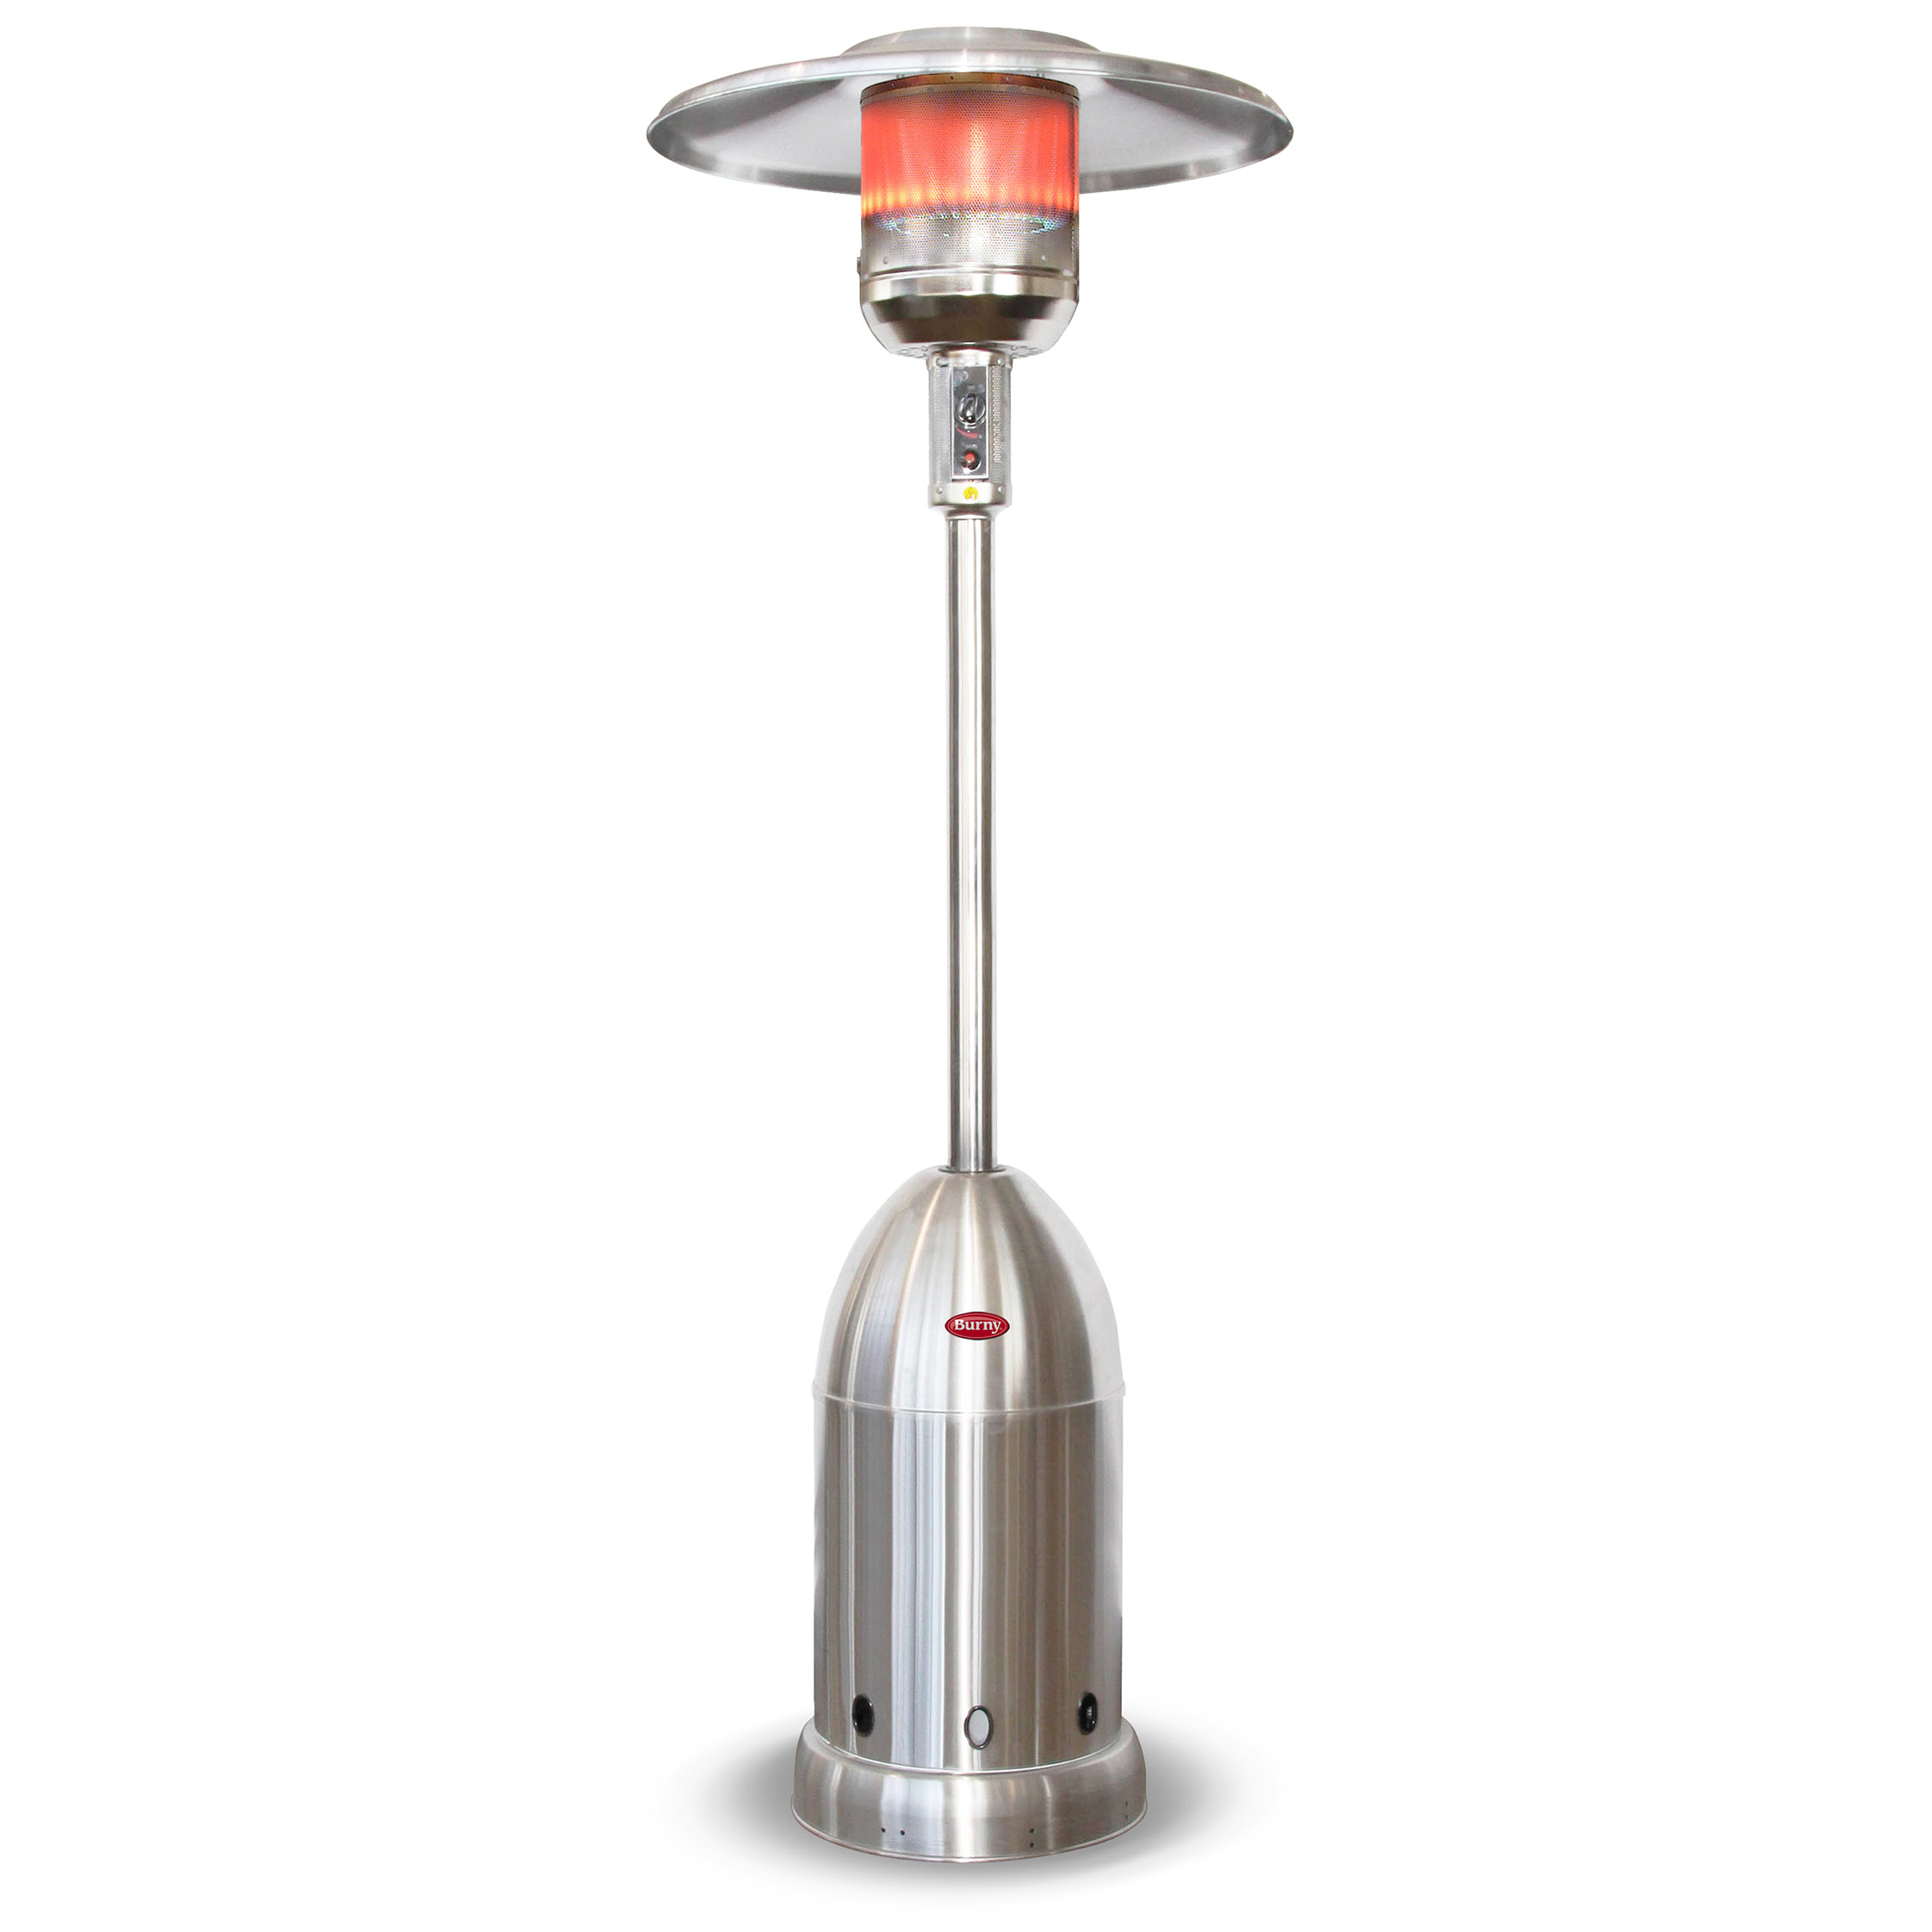 Burny Classical Burner Stainless Steel Gas Heater 2940 intended for dimensions 2244 X 2244